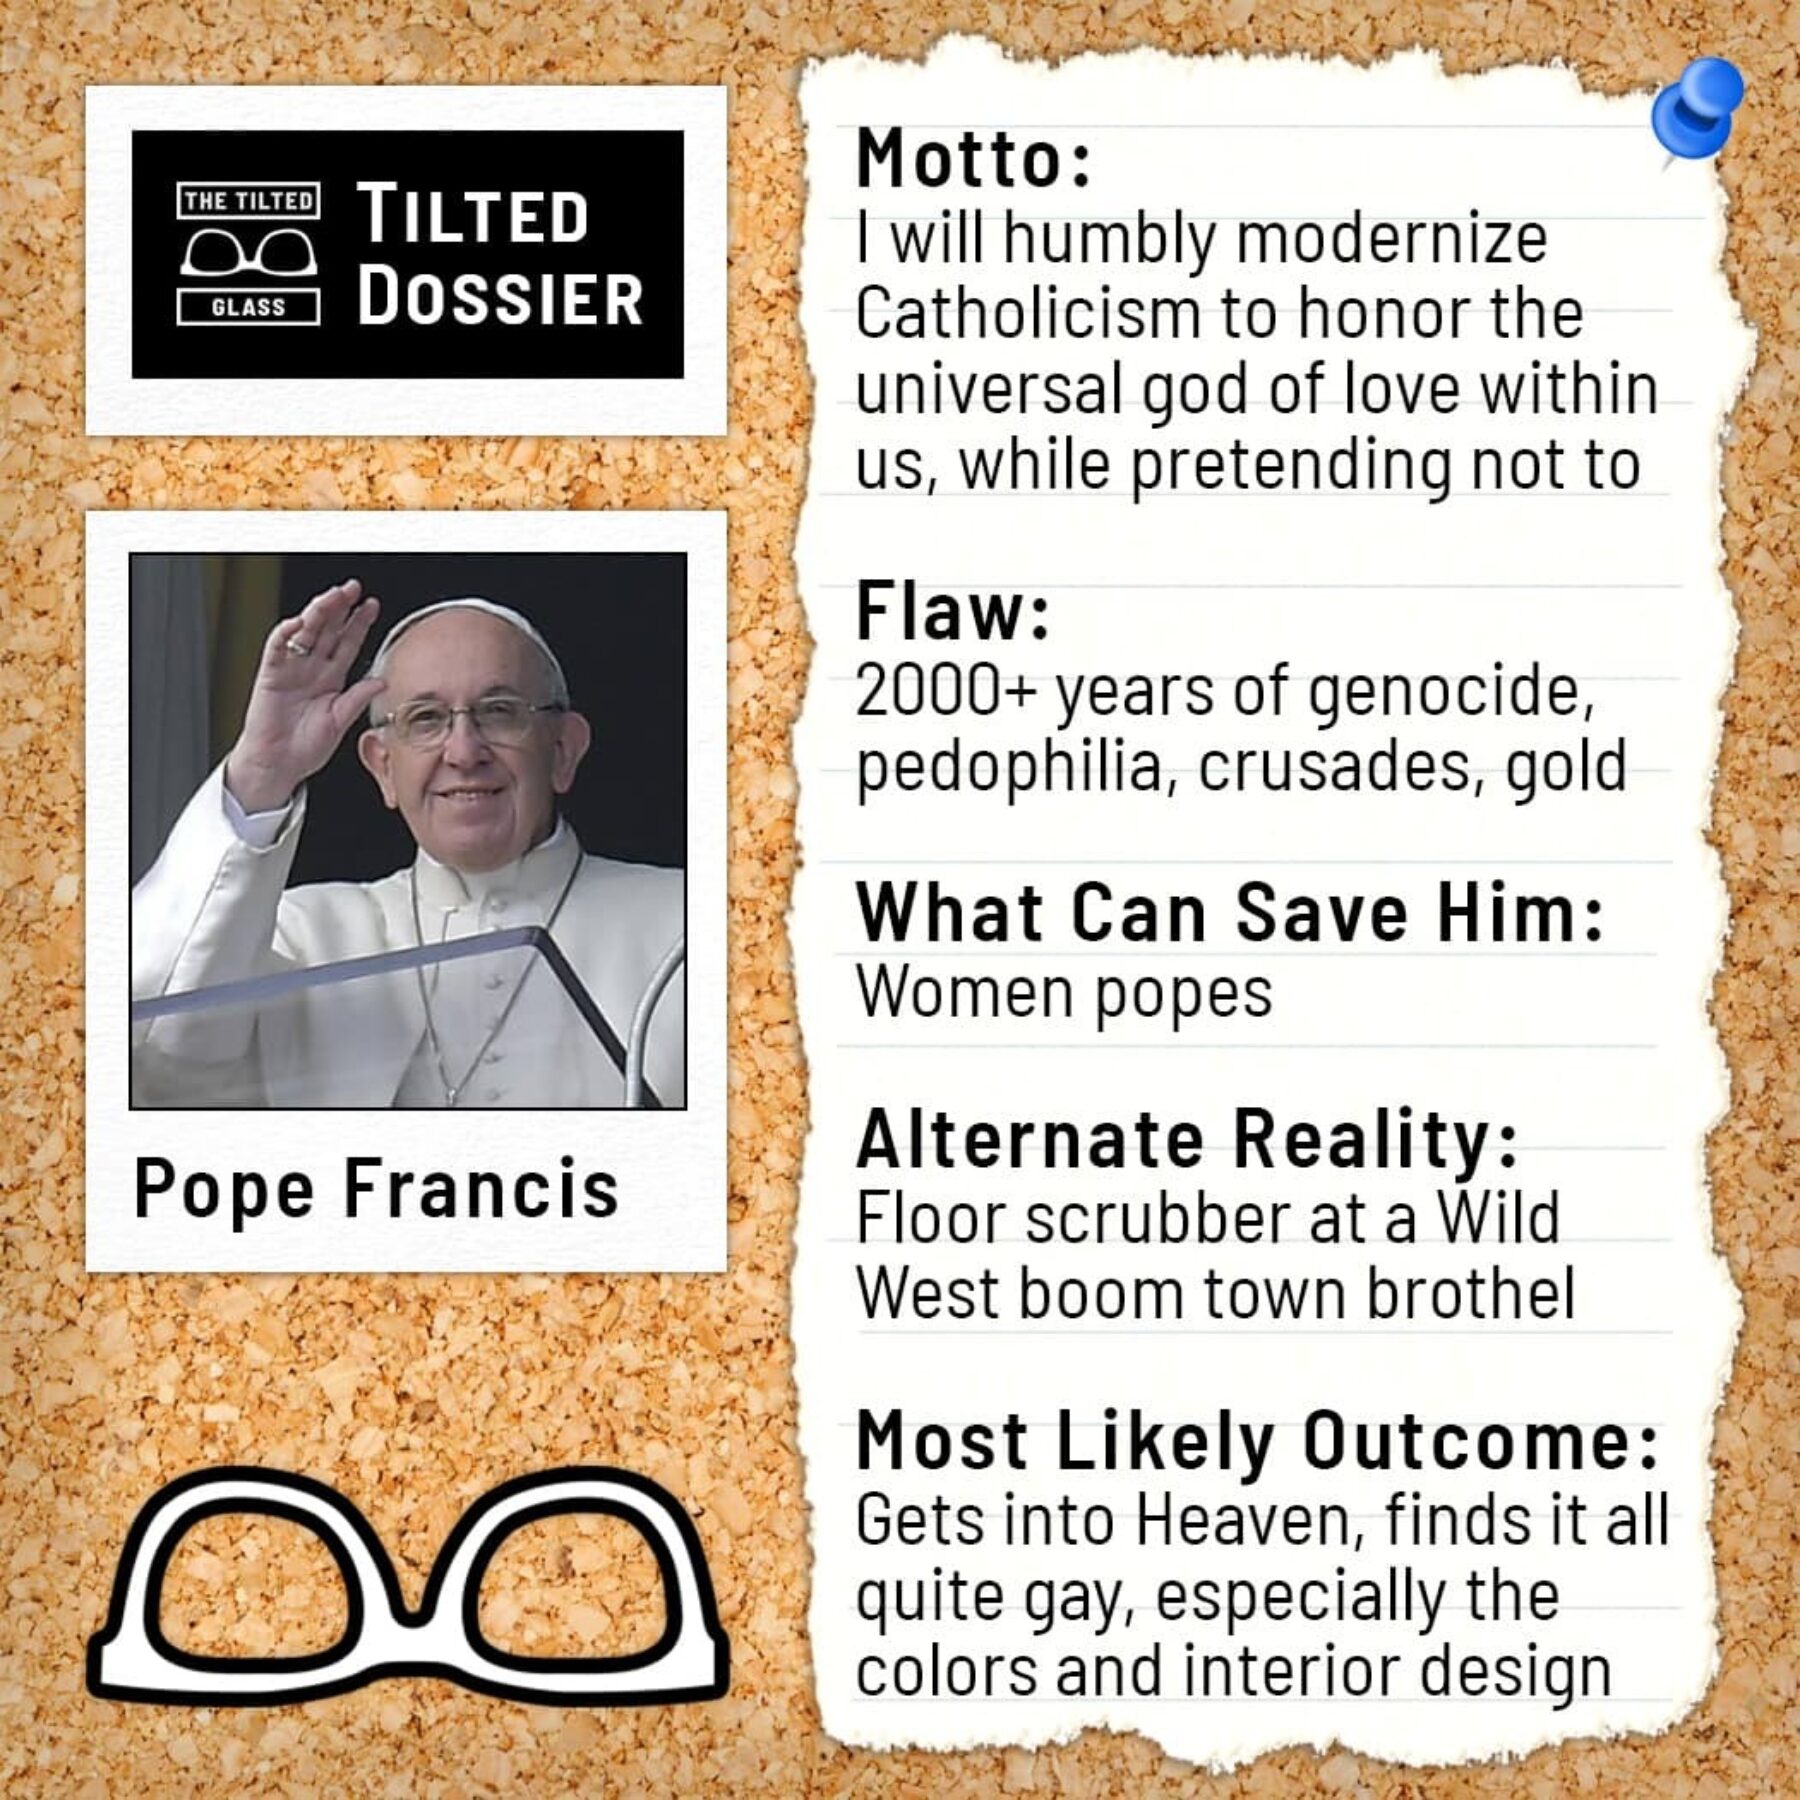 Who is Pope Francis? A Dossier Roast